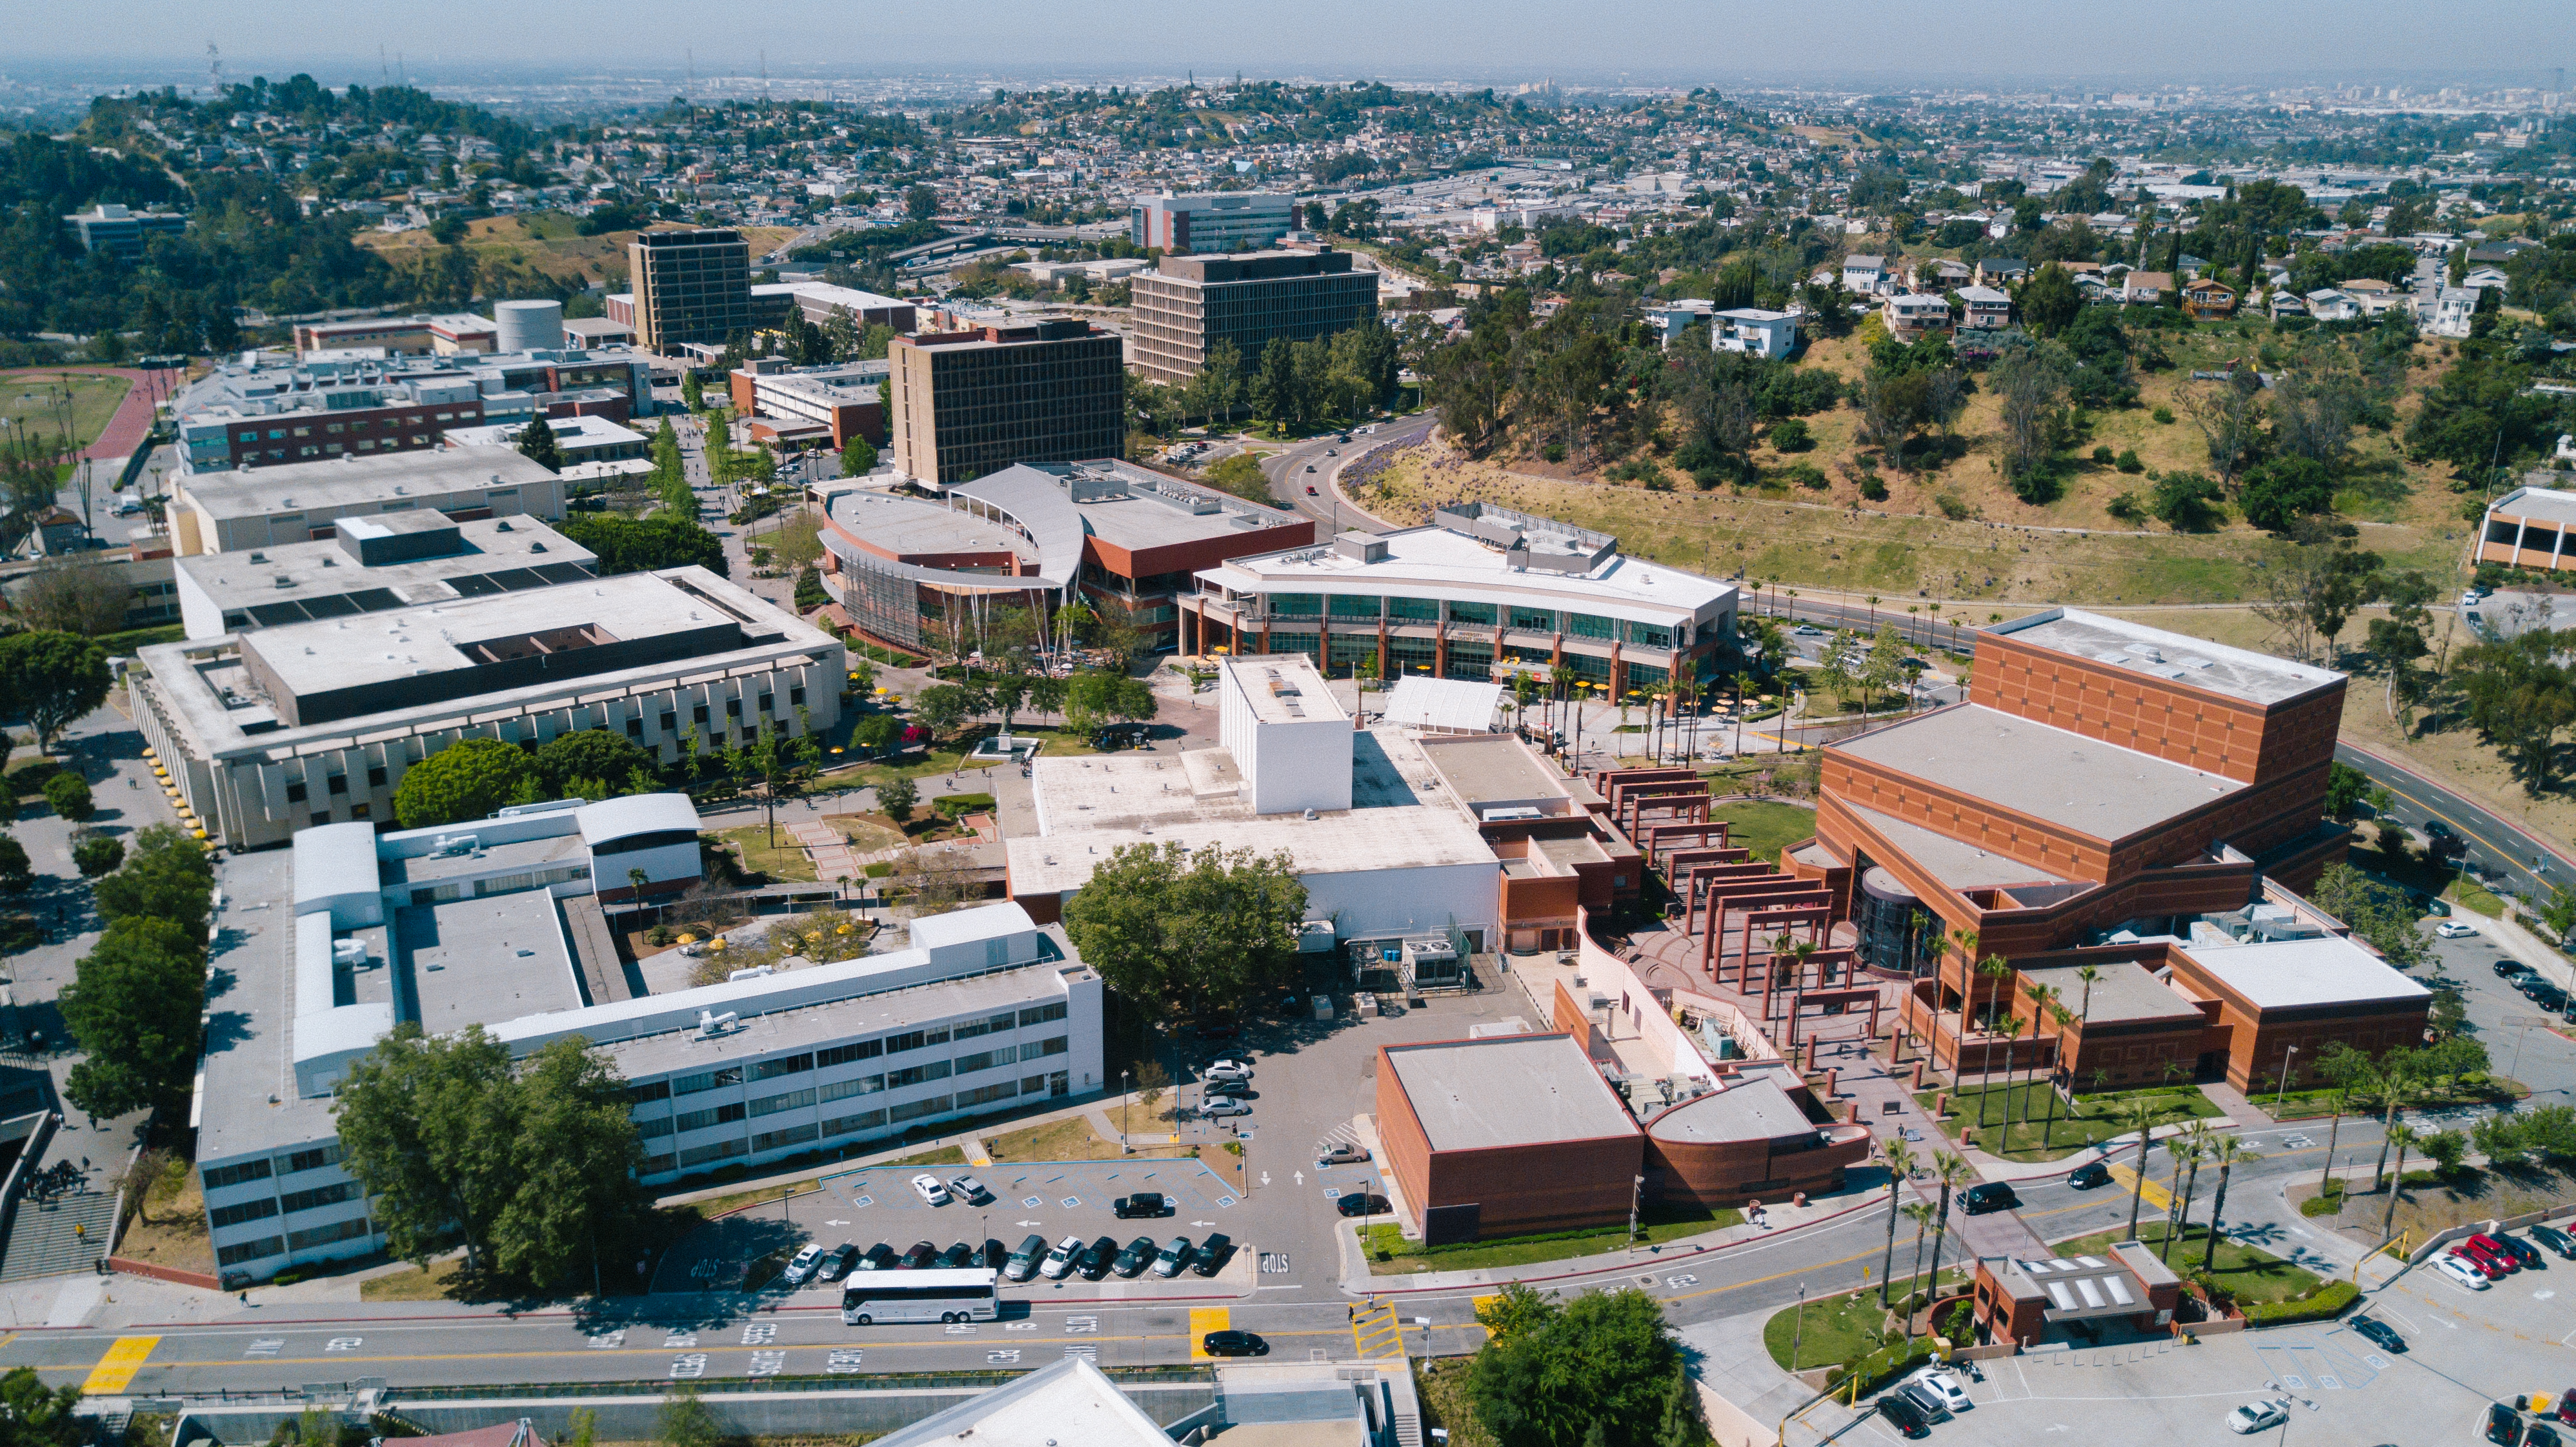 Cal State La Fall 2022 Schedule Cal State Los Angeles To Begin Spring Semester Remotely For 3 Weeks - News  Nation Usa